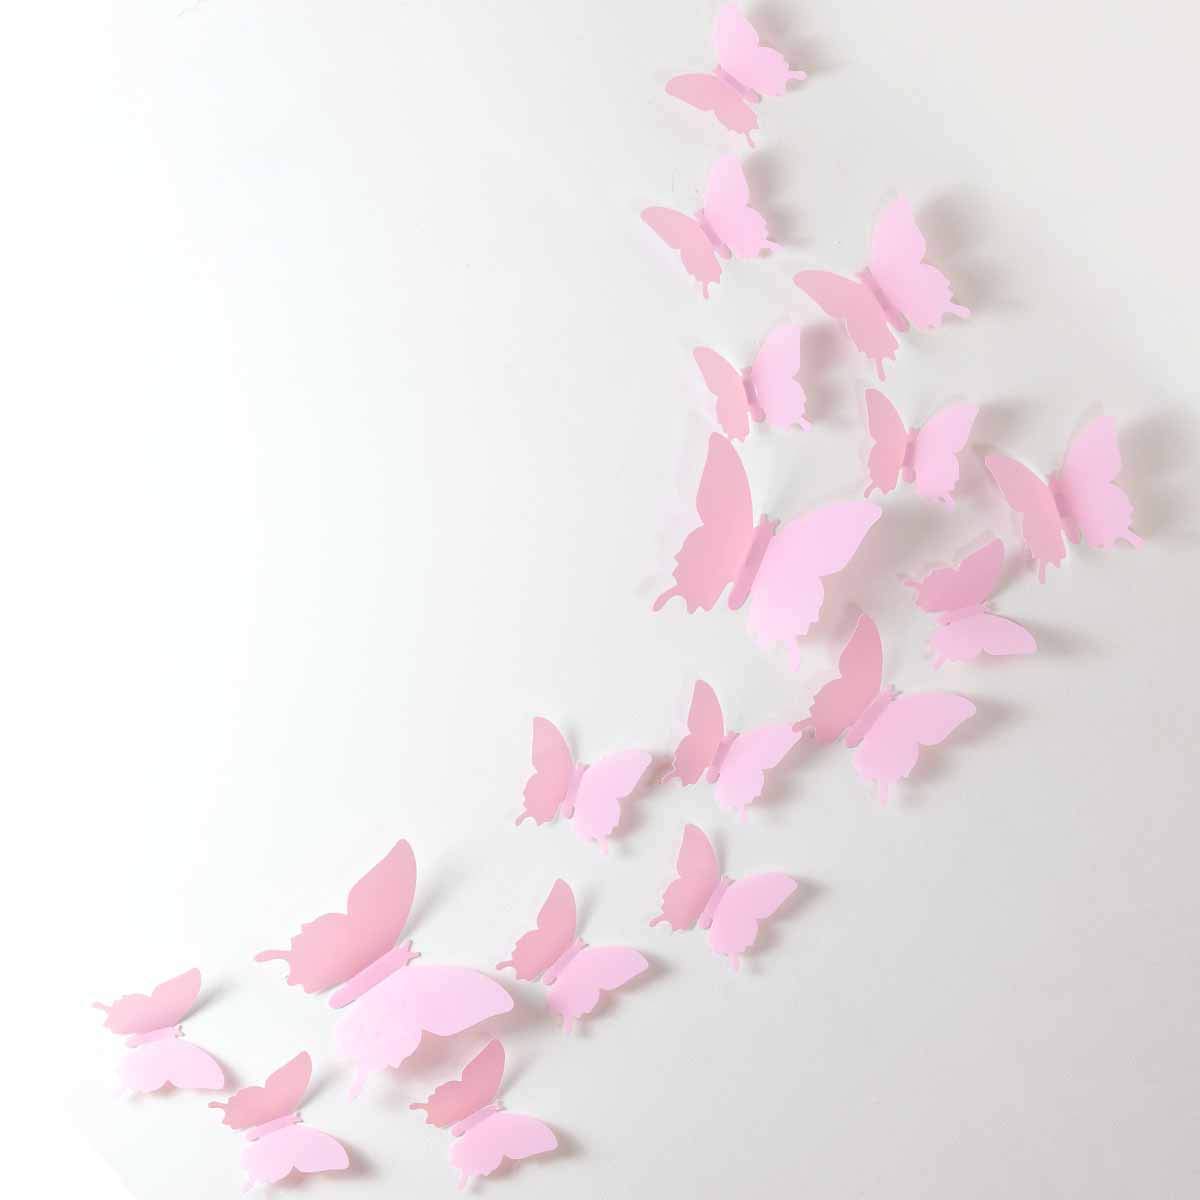 24pcs 3D Butterfly Removable Mural Stickers Wall Stickers Decal for Home and Room Decoration (Pink)